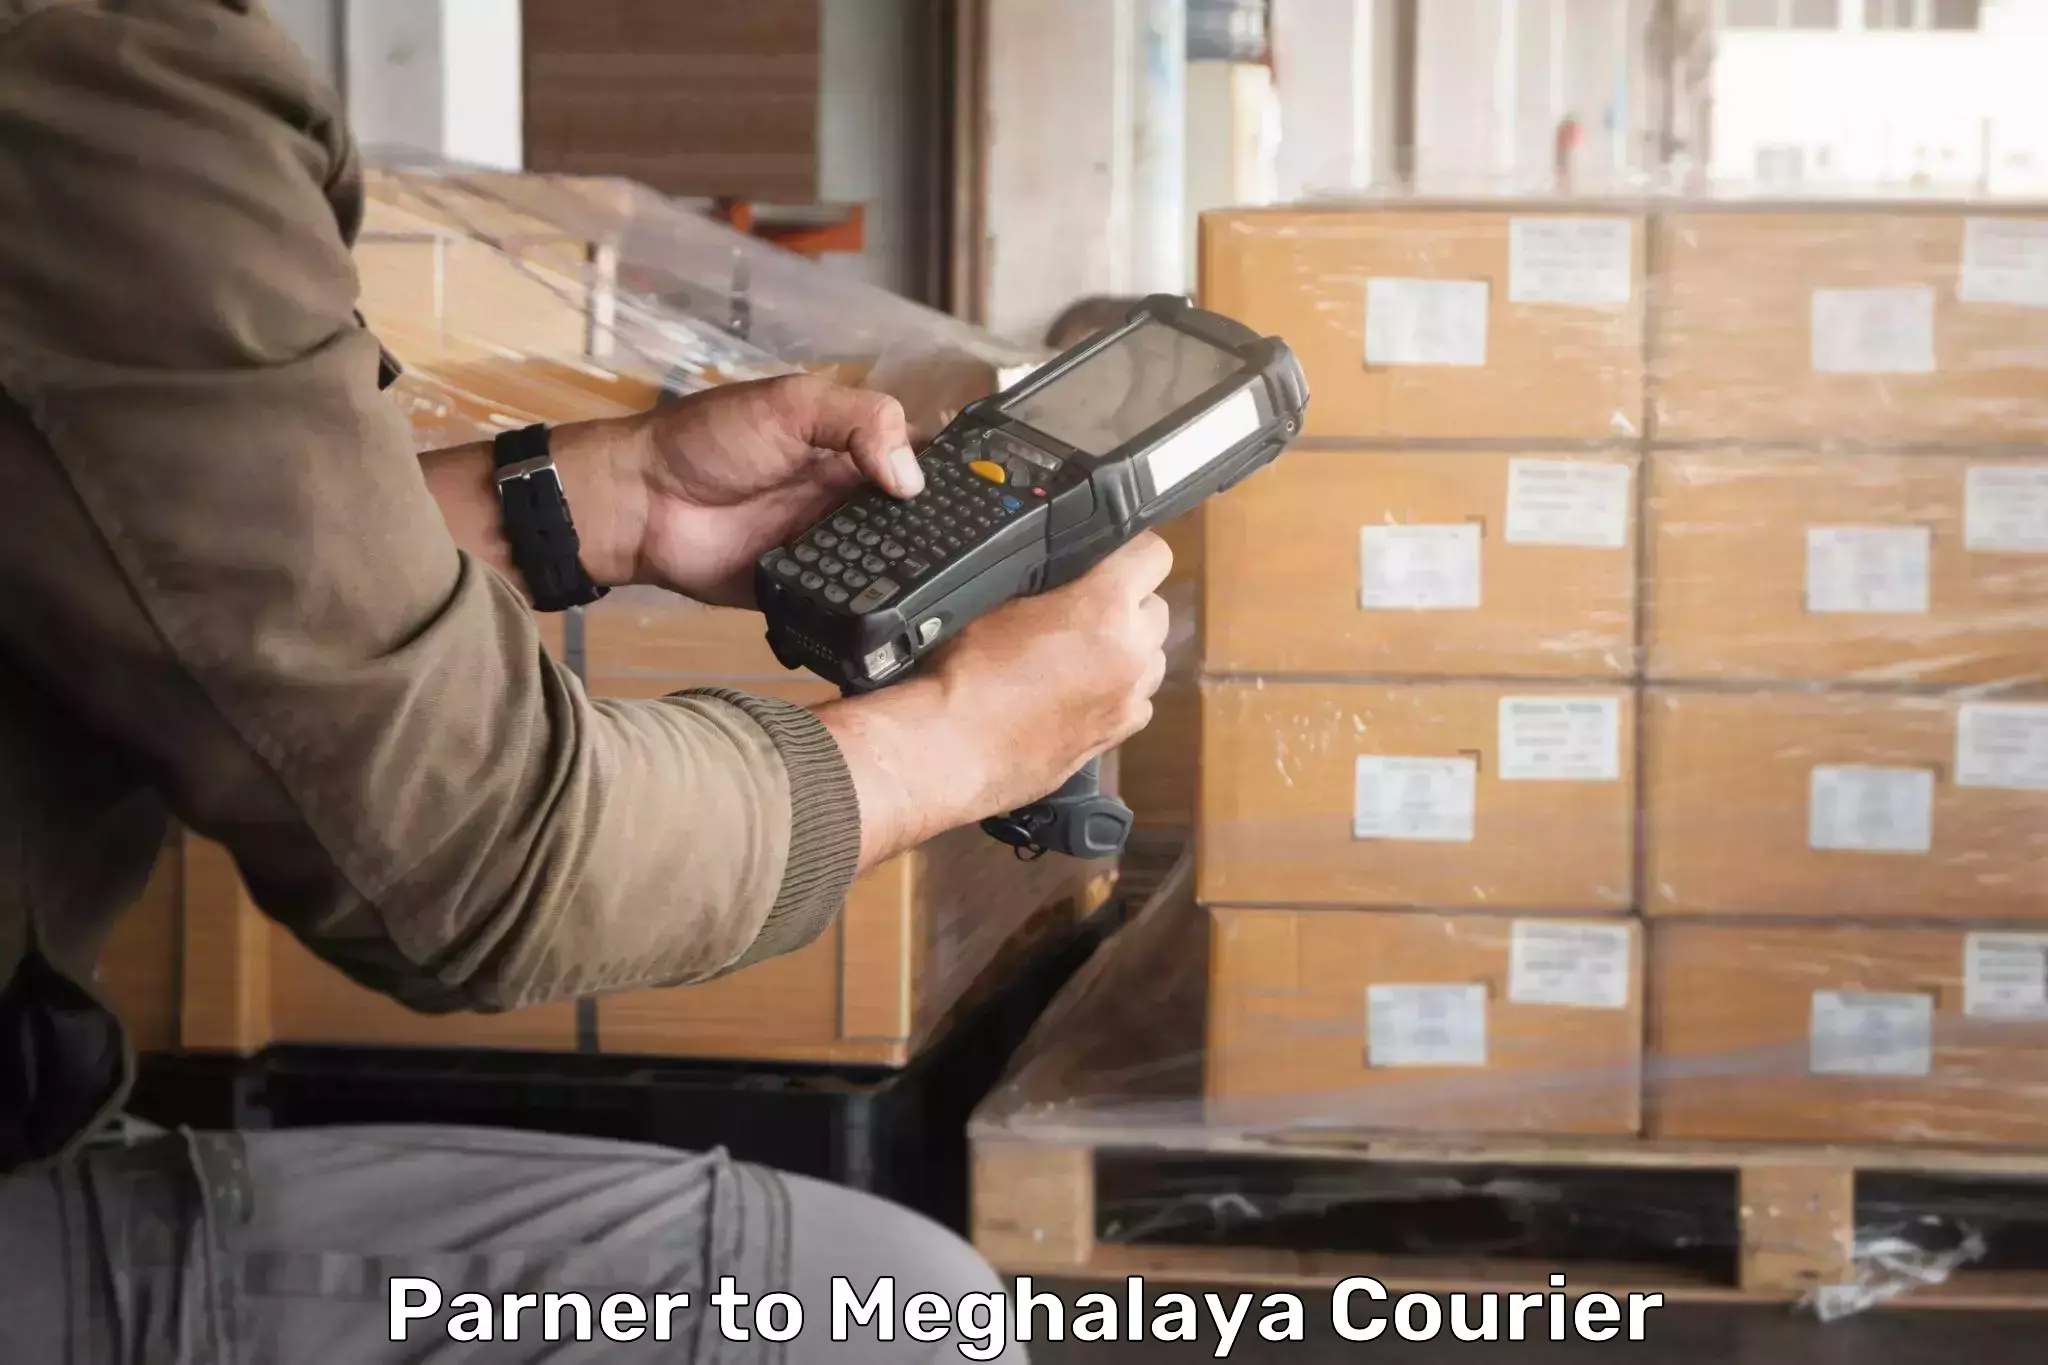 Bulk courier orders Parner to Tura